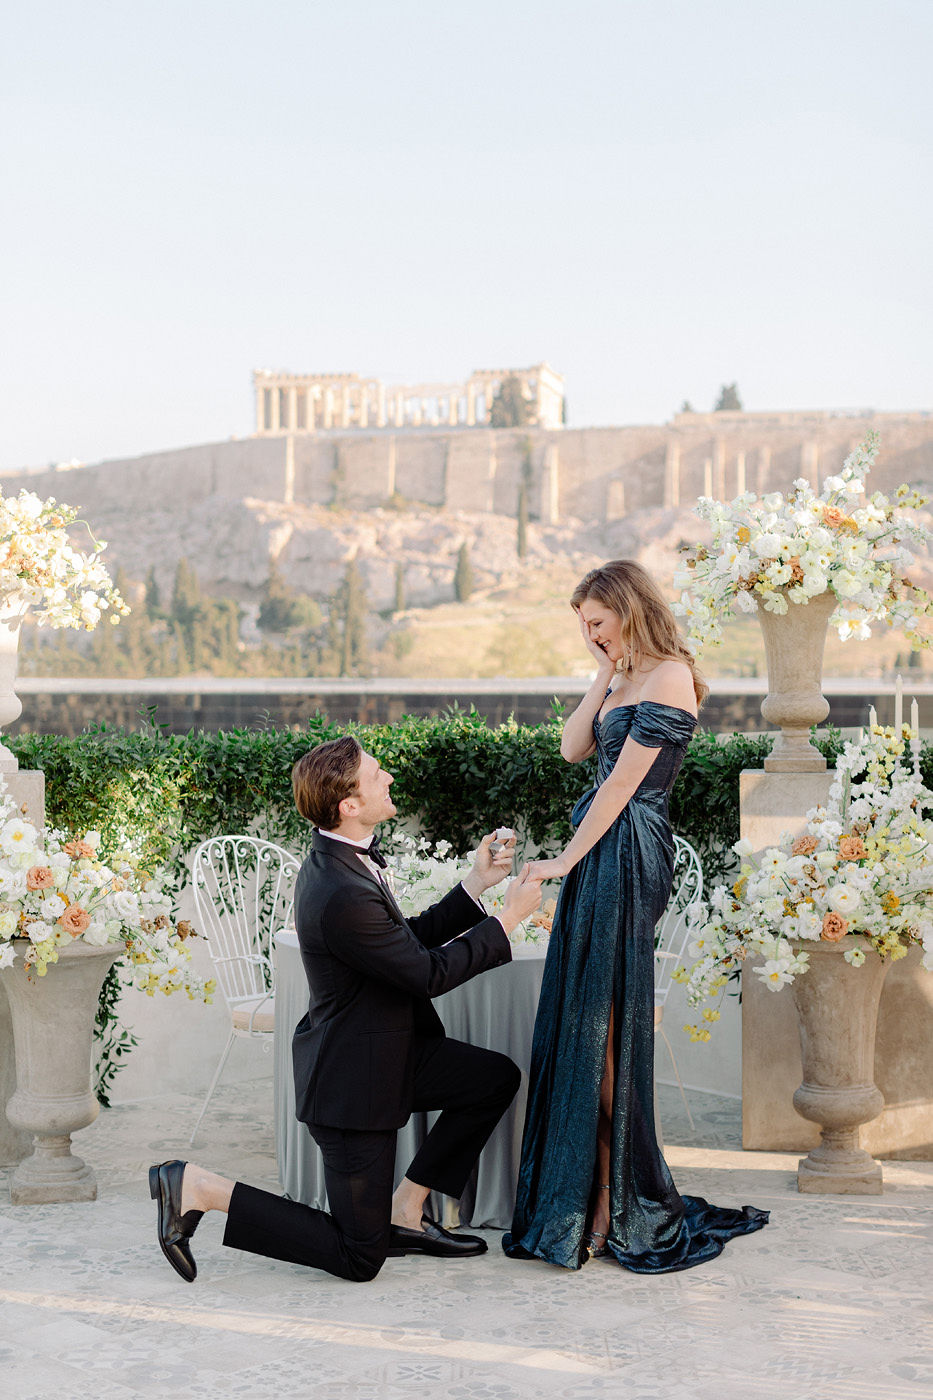 A stylish proposal + engagement shoot in Greece